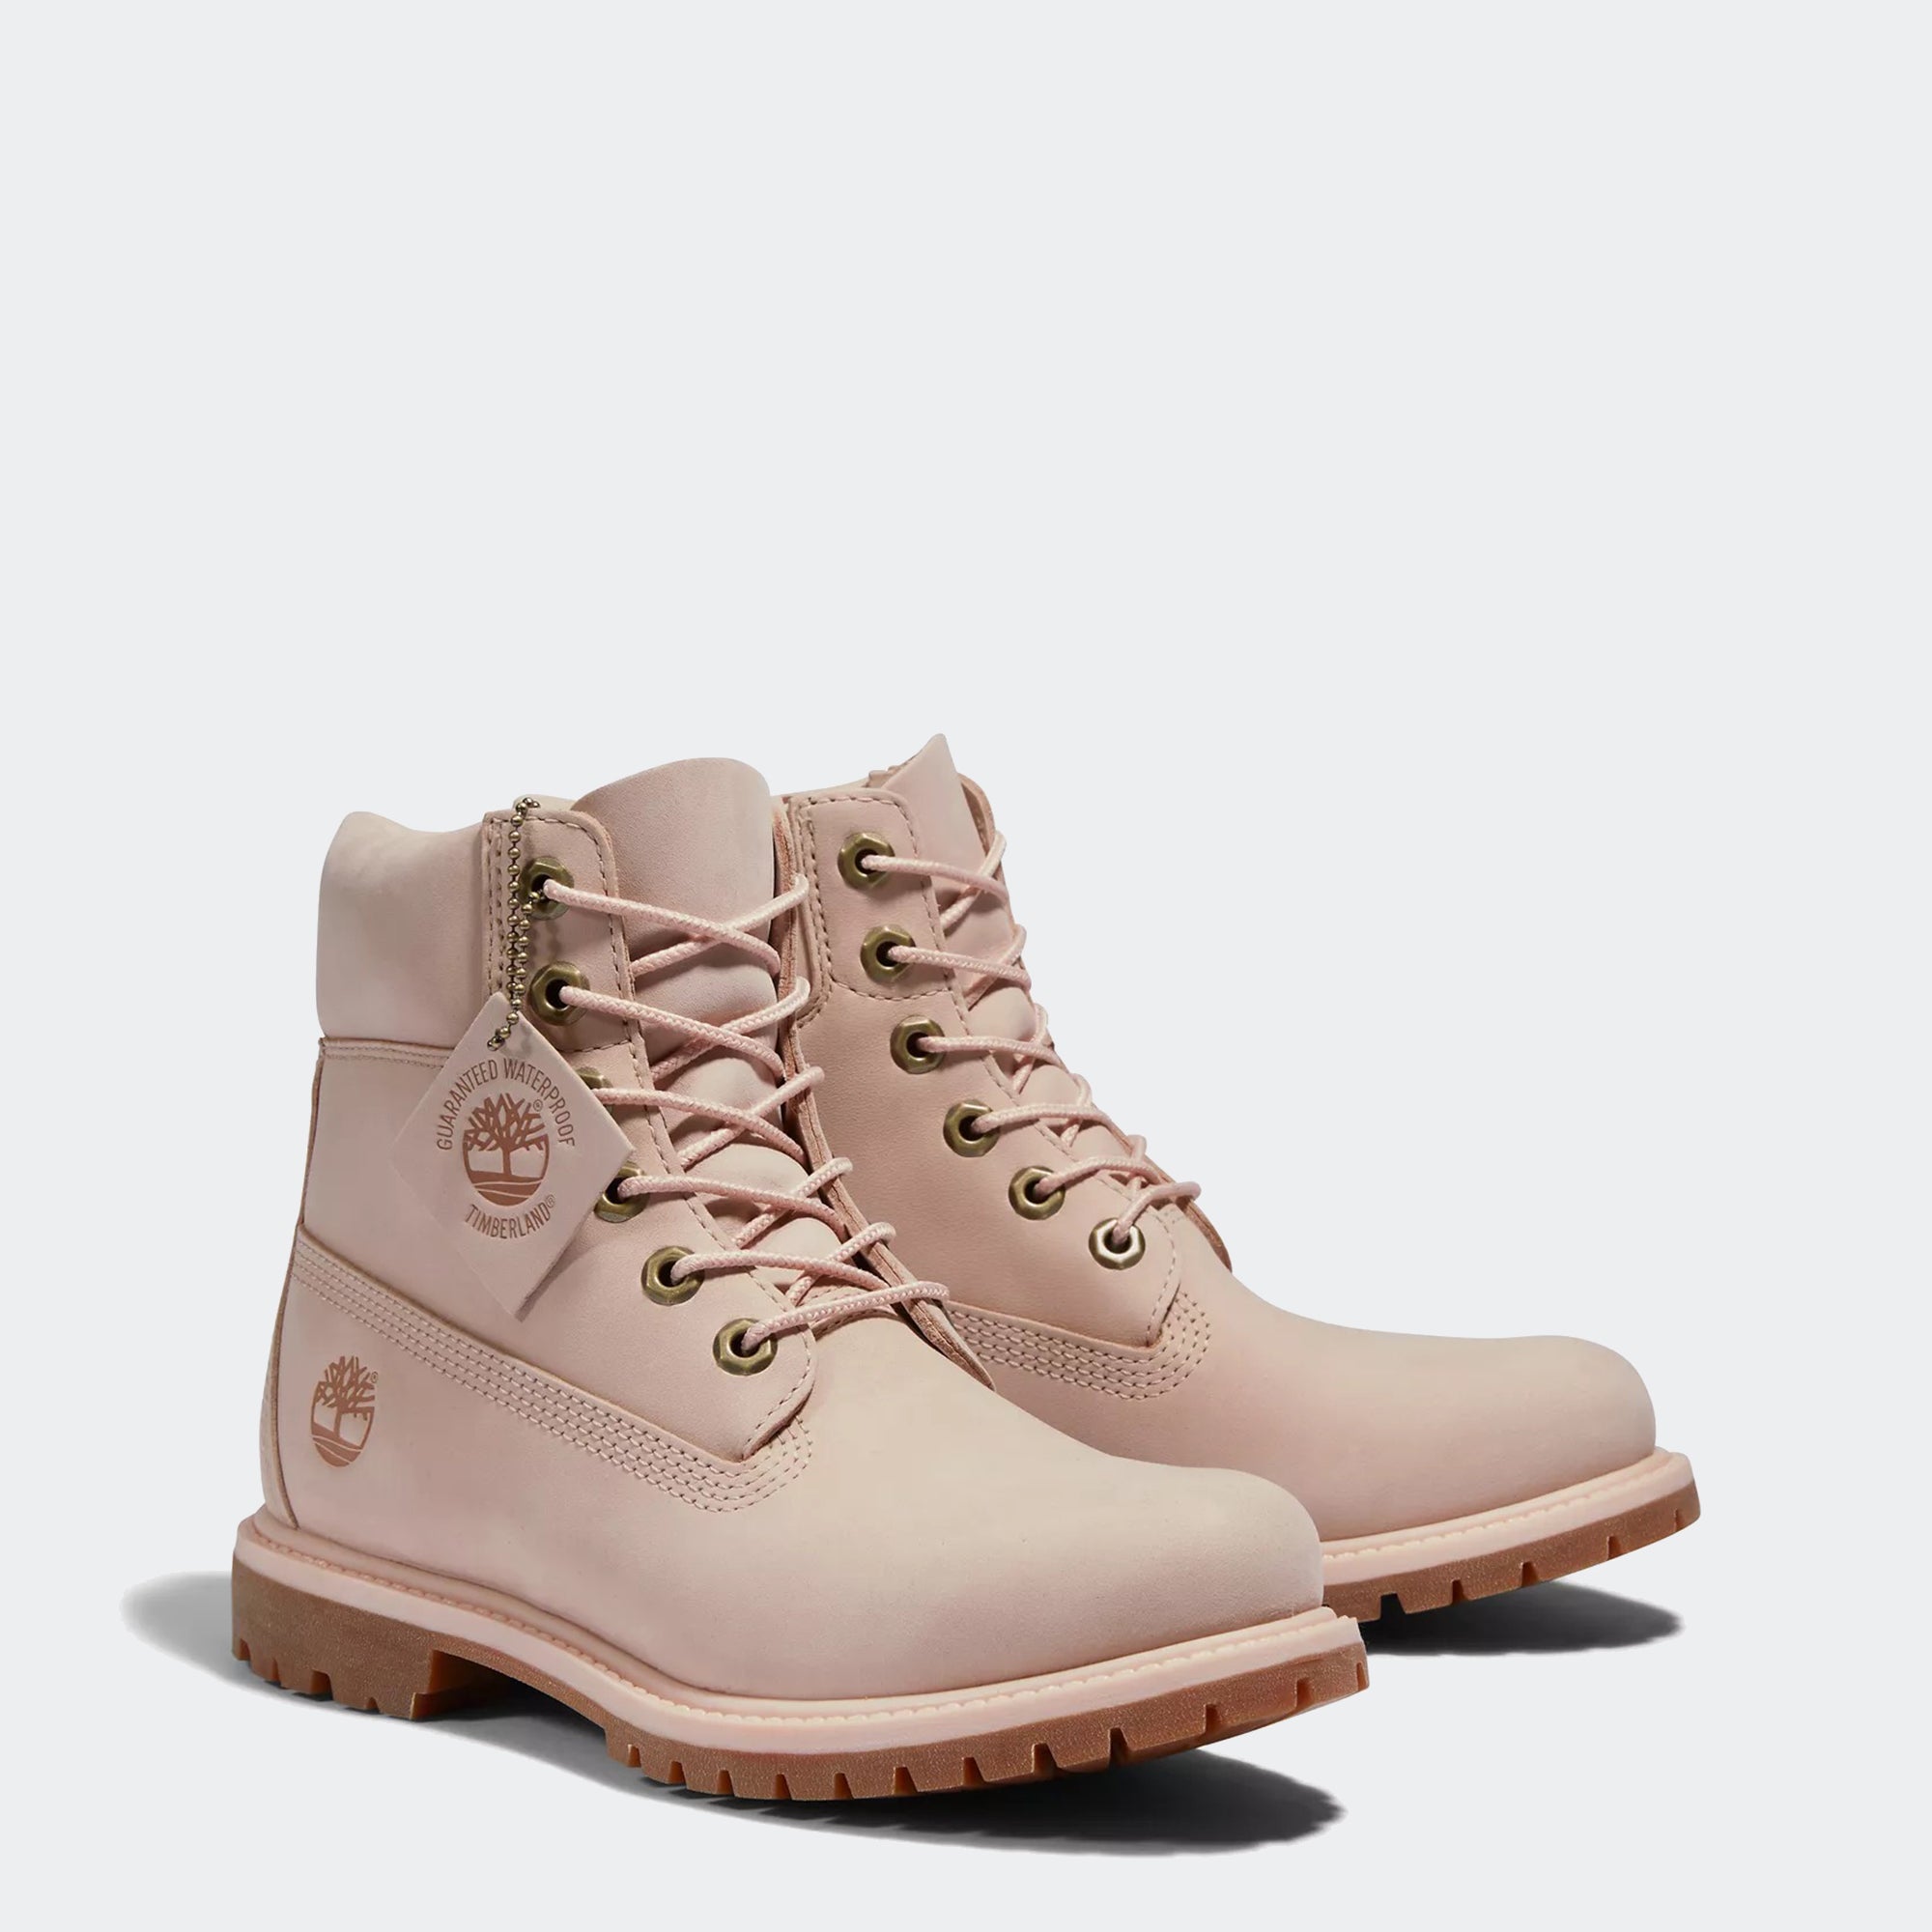 Timberland 6-Inch Waterproof Boots Light Pink | Chicago City Sports